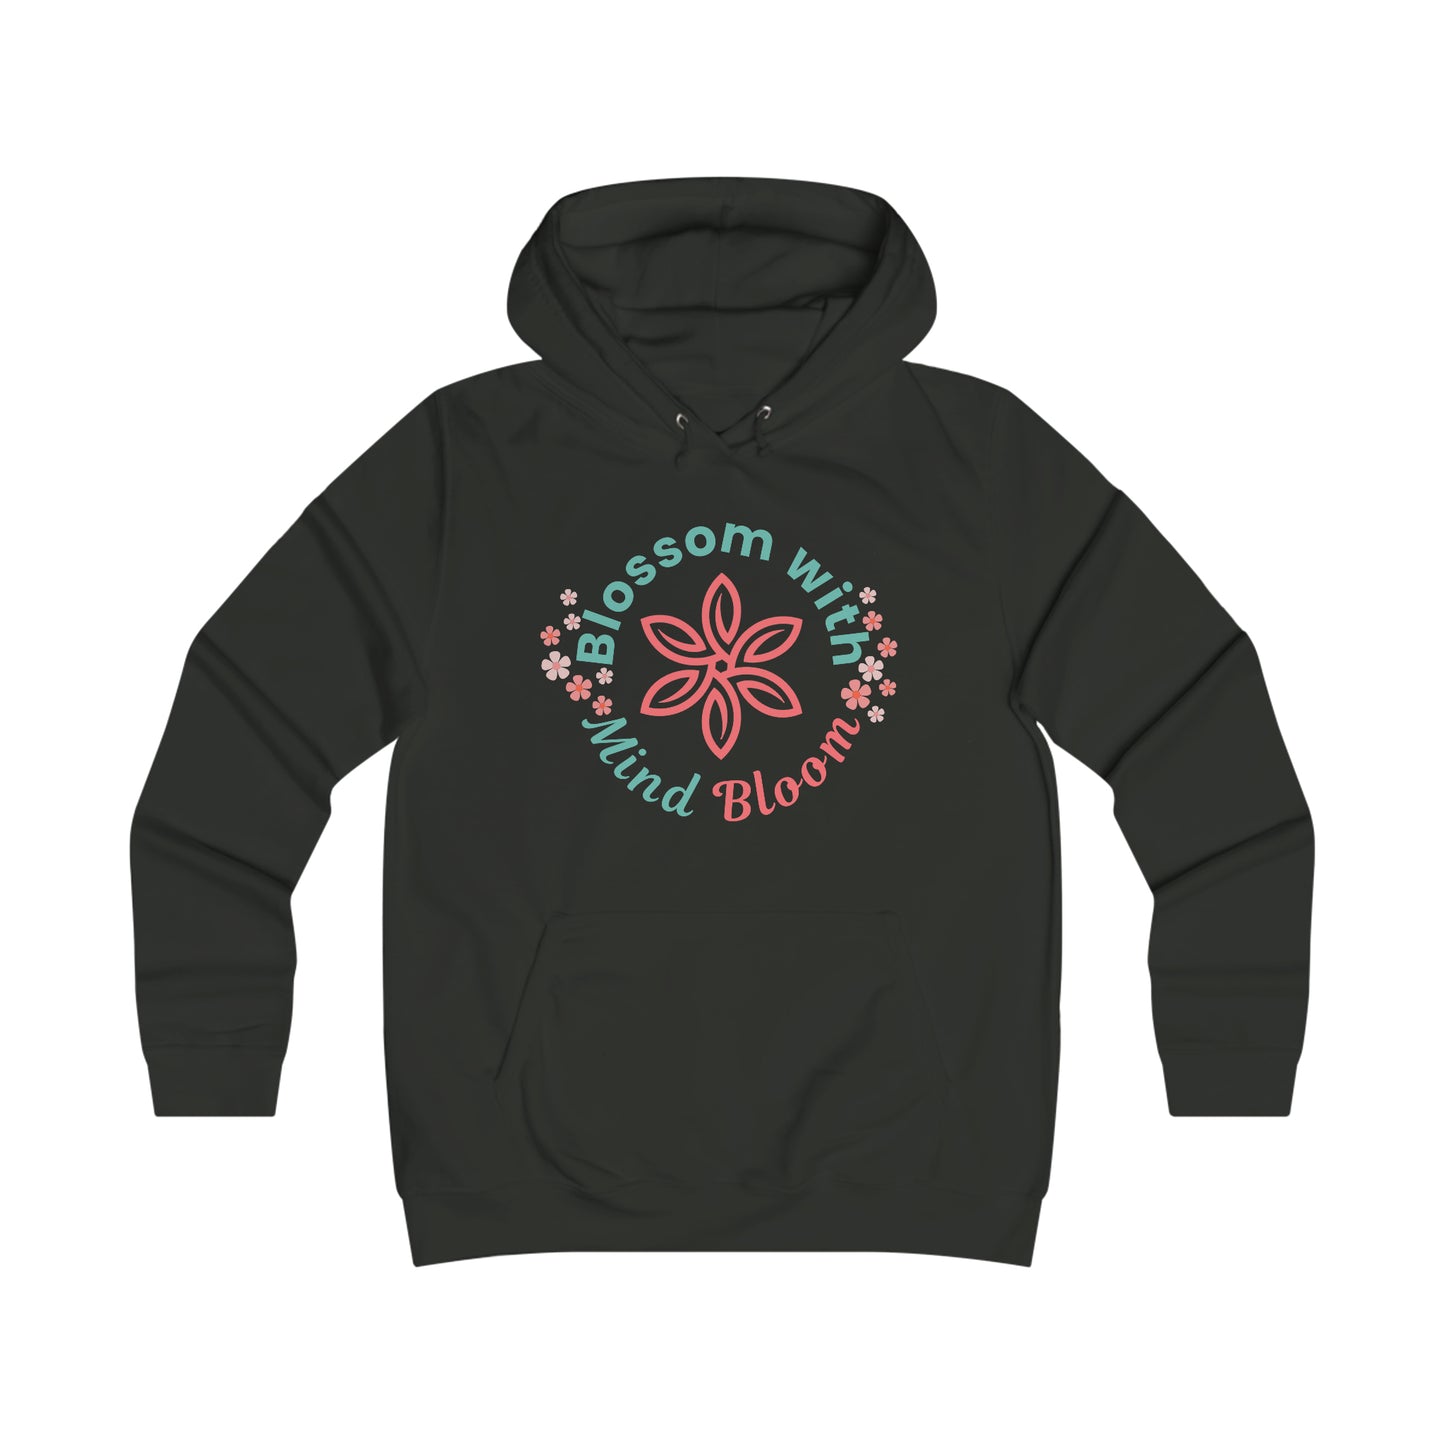 Blossom with Mind Bloom Hoodie